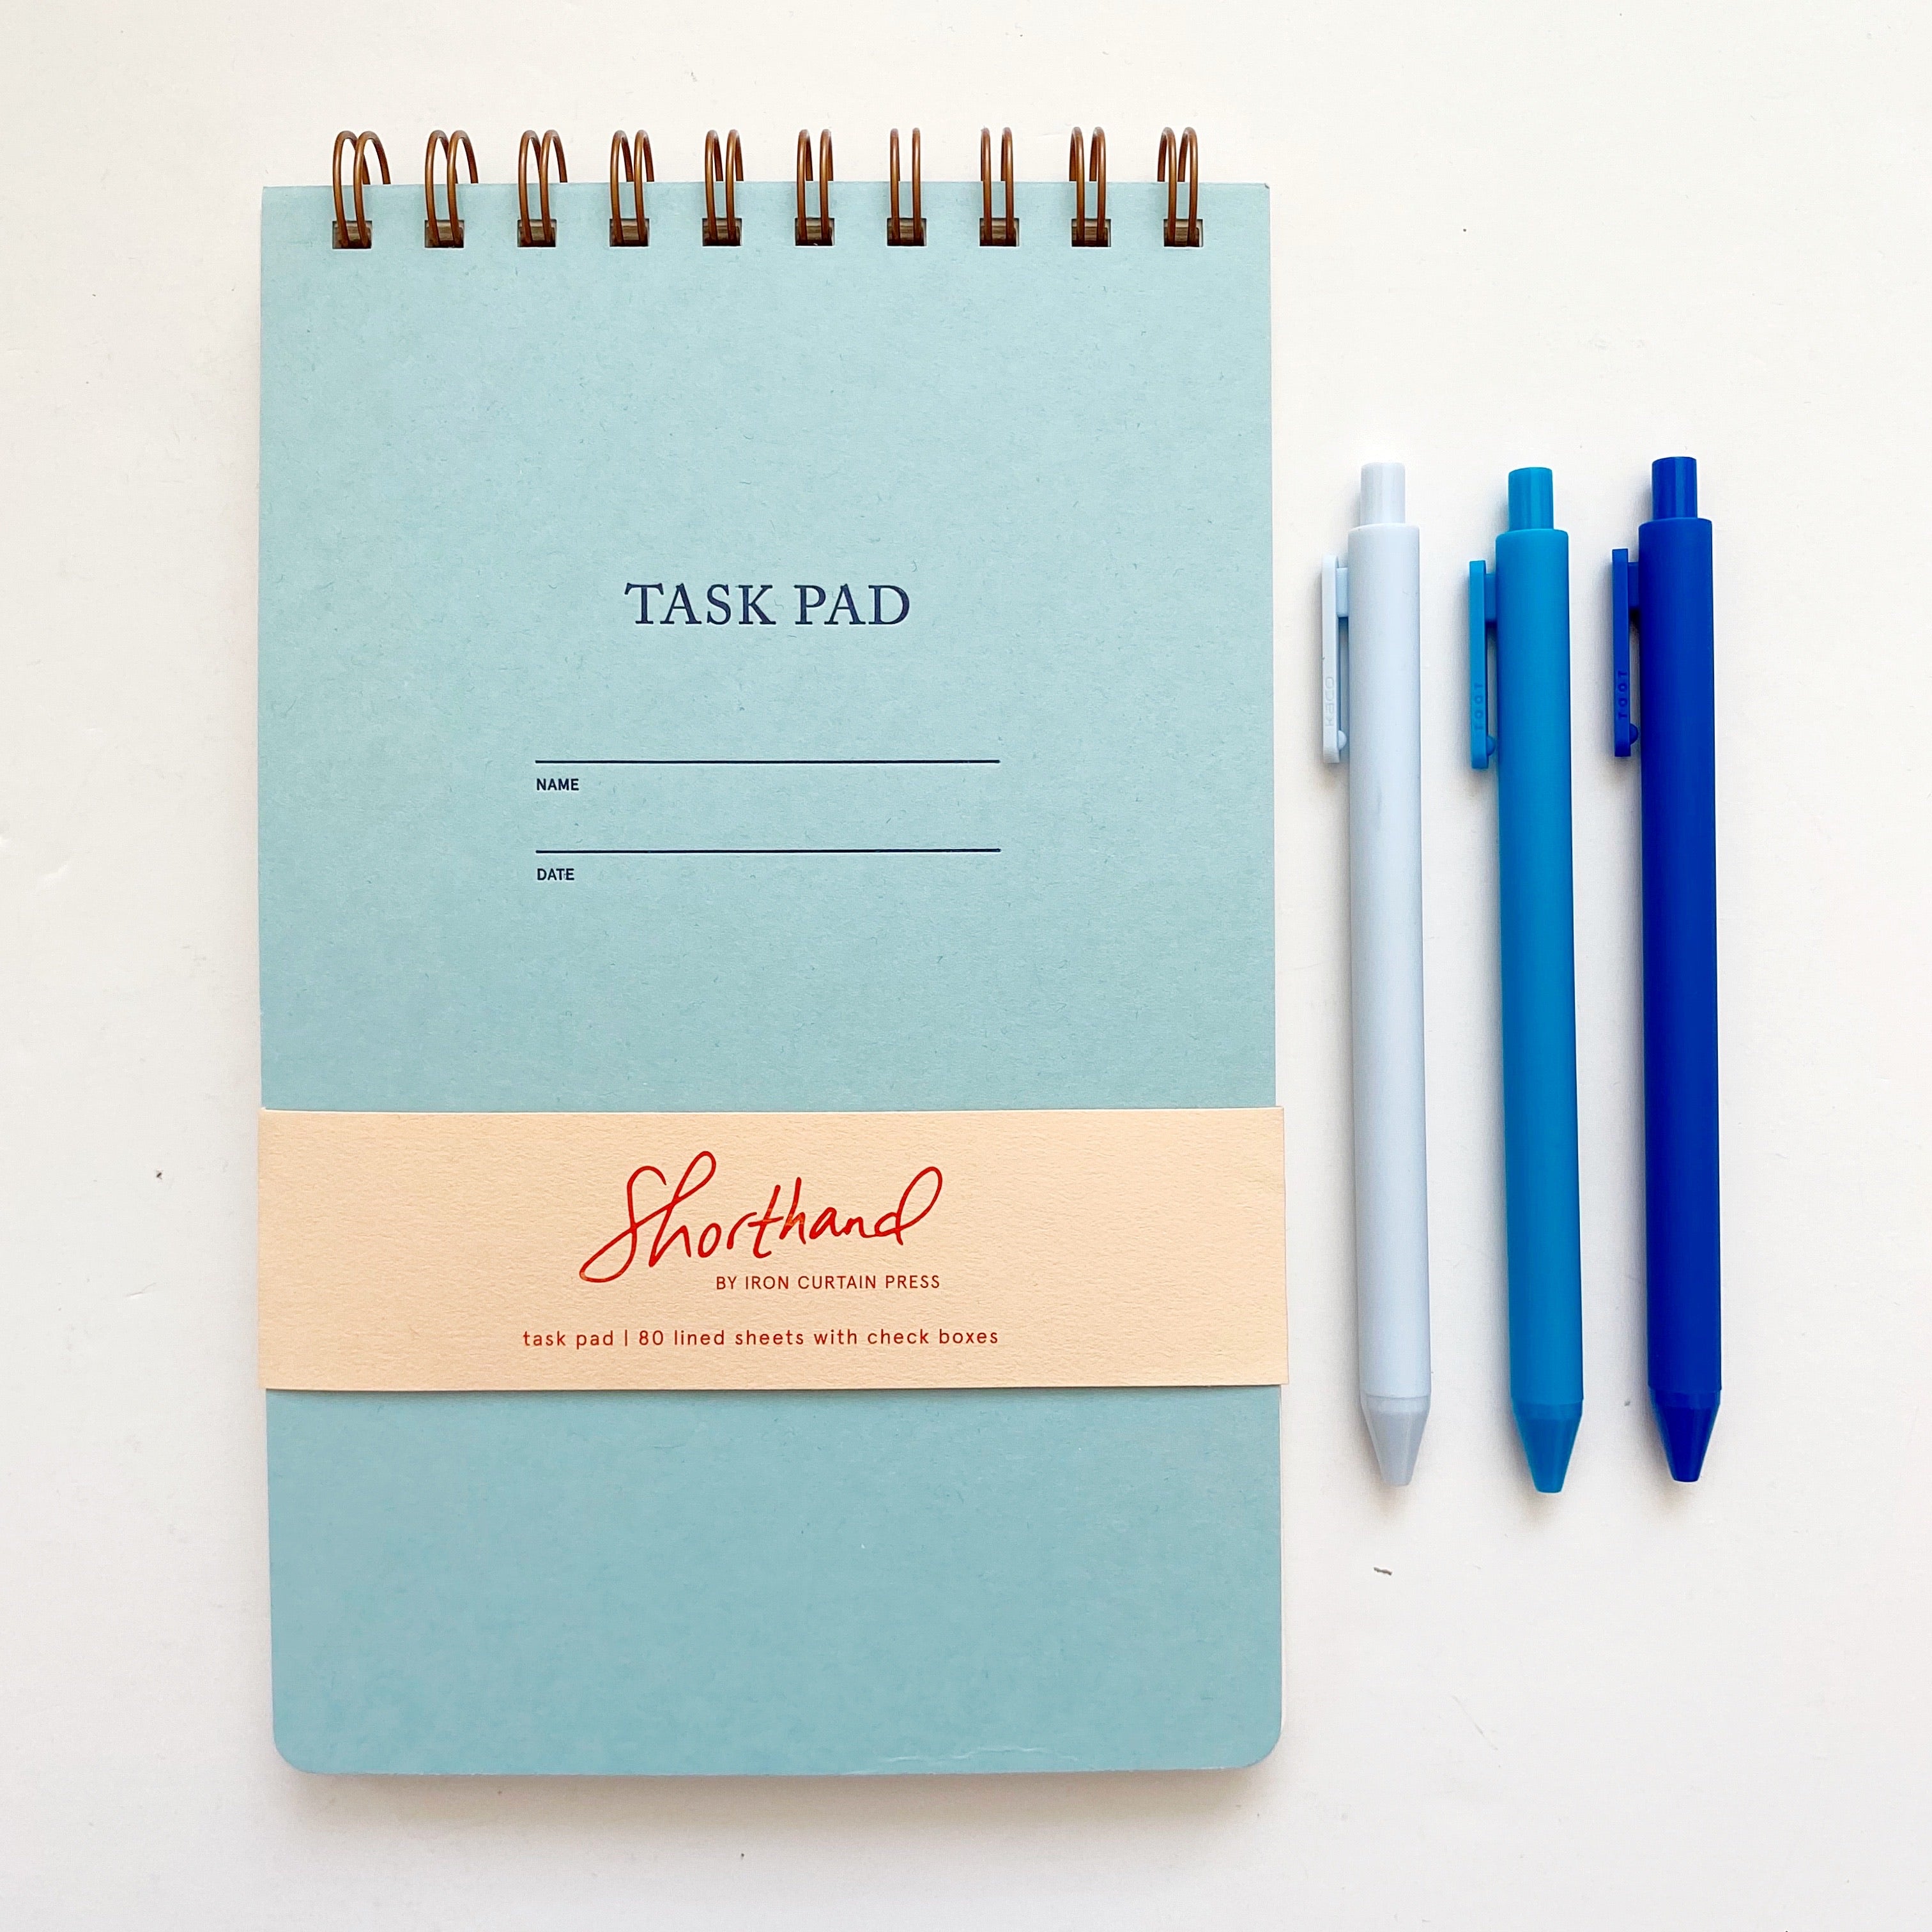 Image of pool blue with letter pressed text says, “Task pad”. “Name” and “Date” with lines for writing. Coiled binding on top with three blue pens.